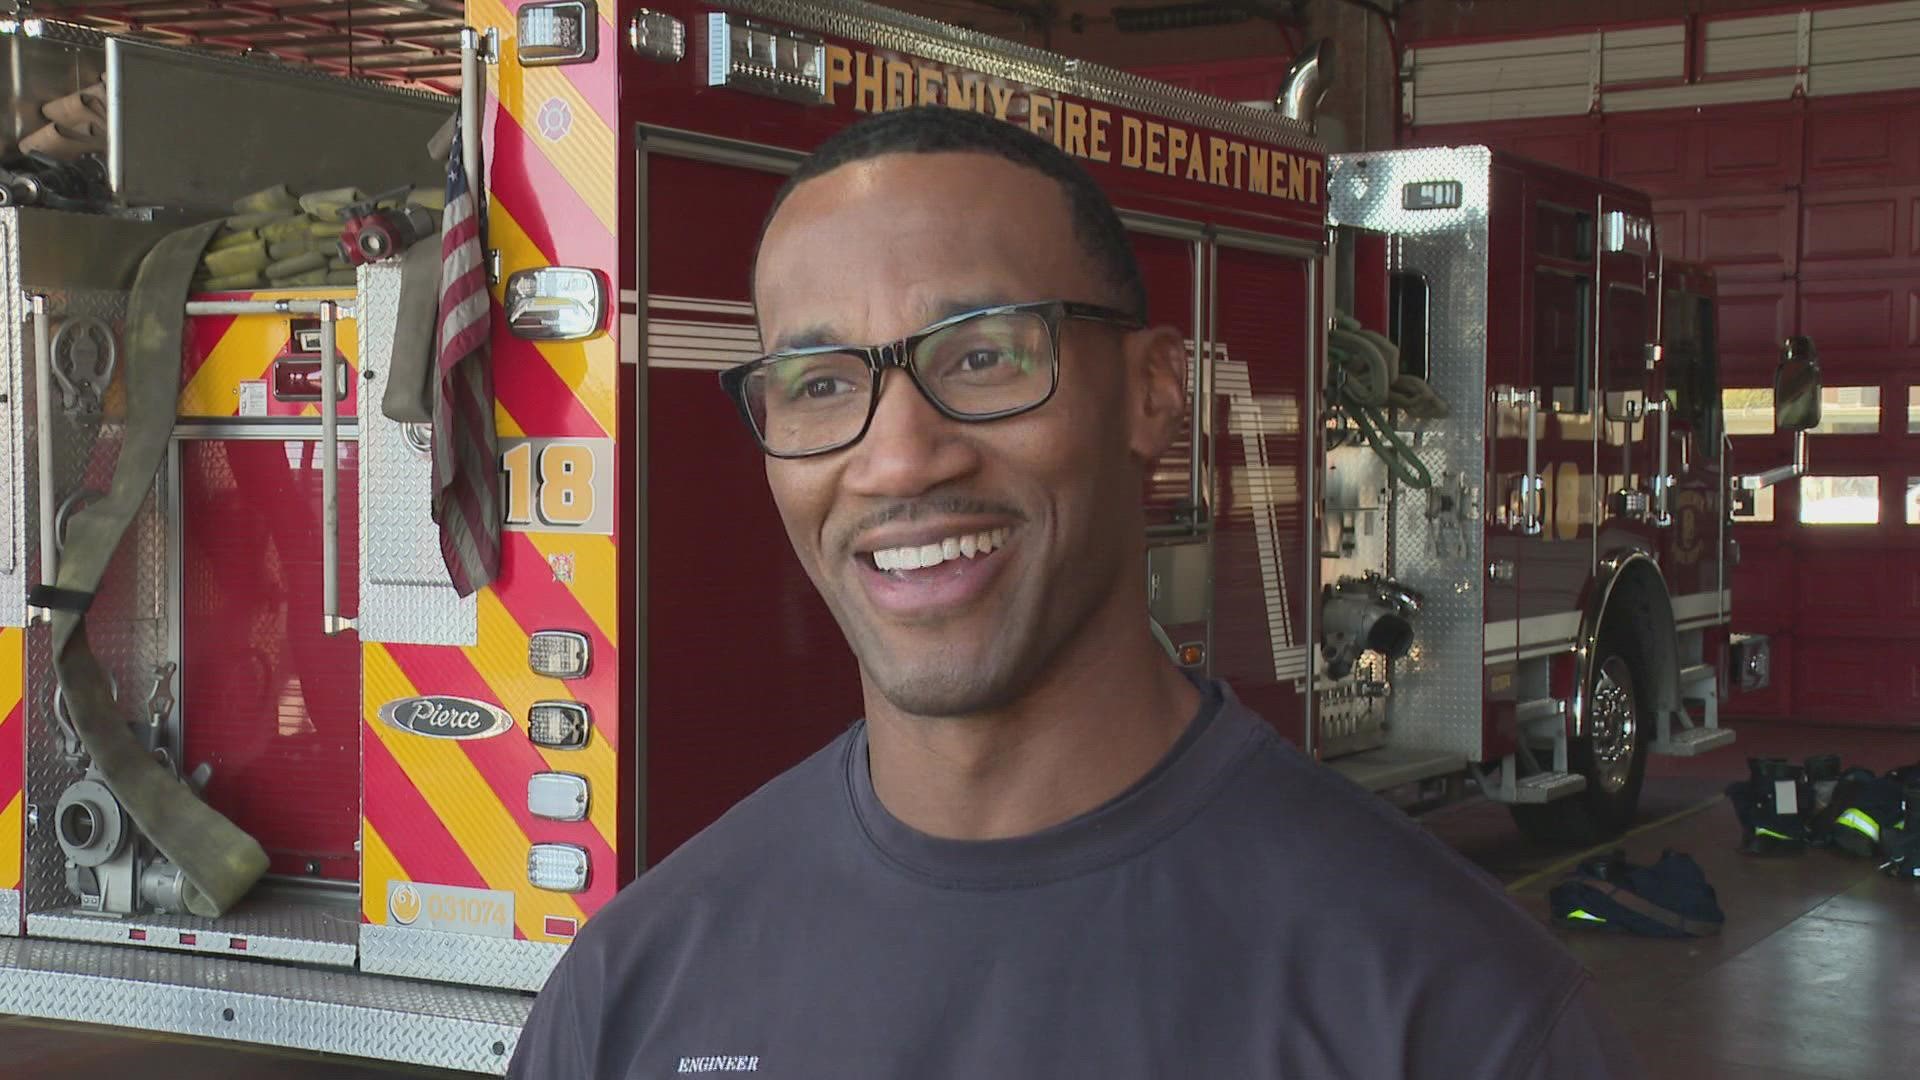 Roy Lewis Jr., who played several seasons in the NFL is now an engineer with the Phoenix Fire Department.